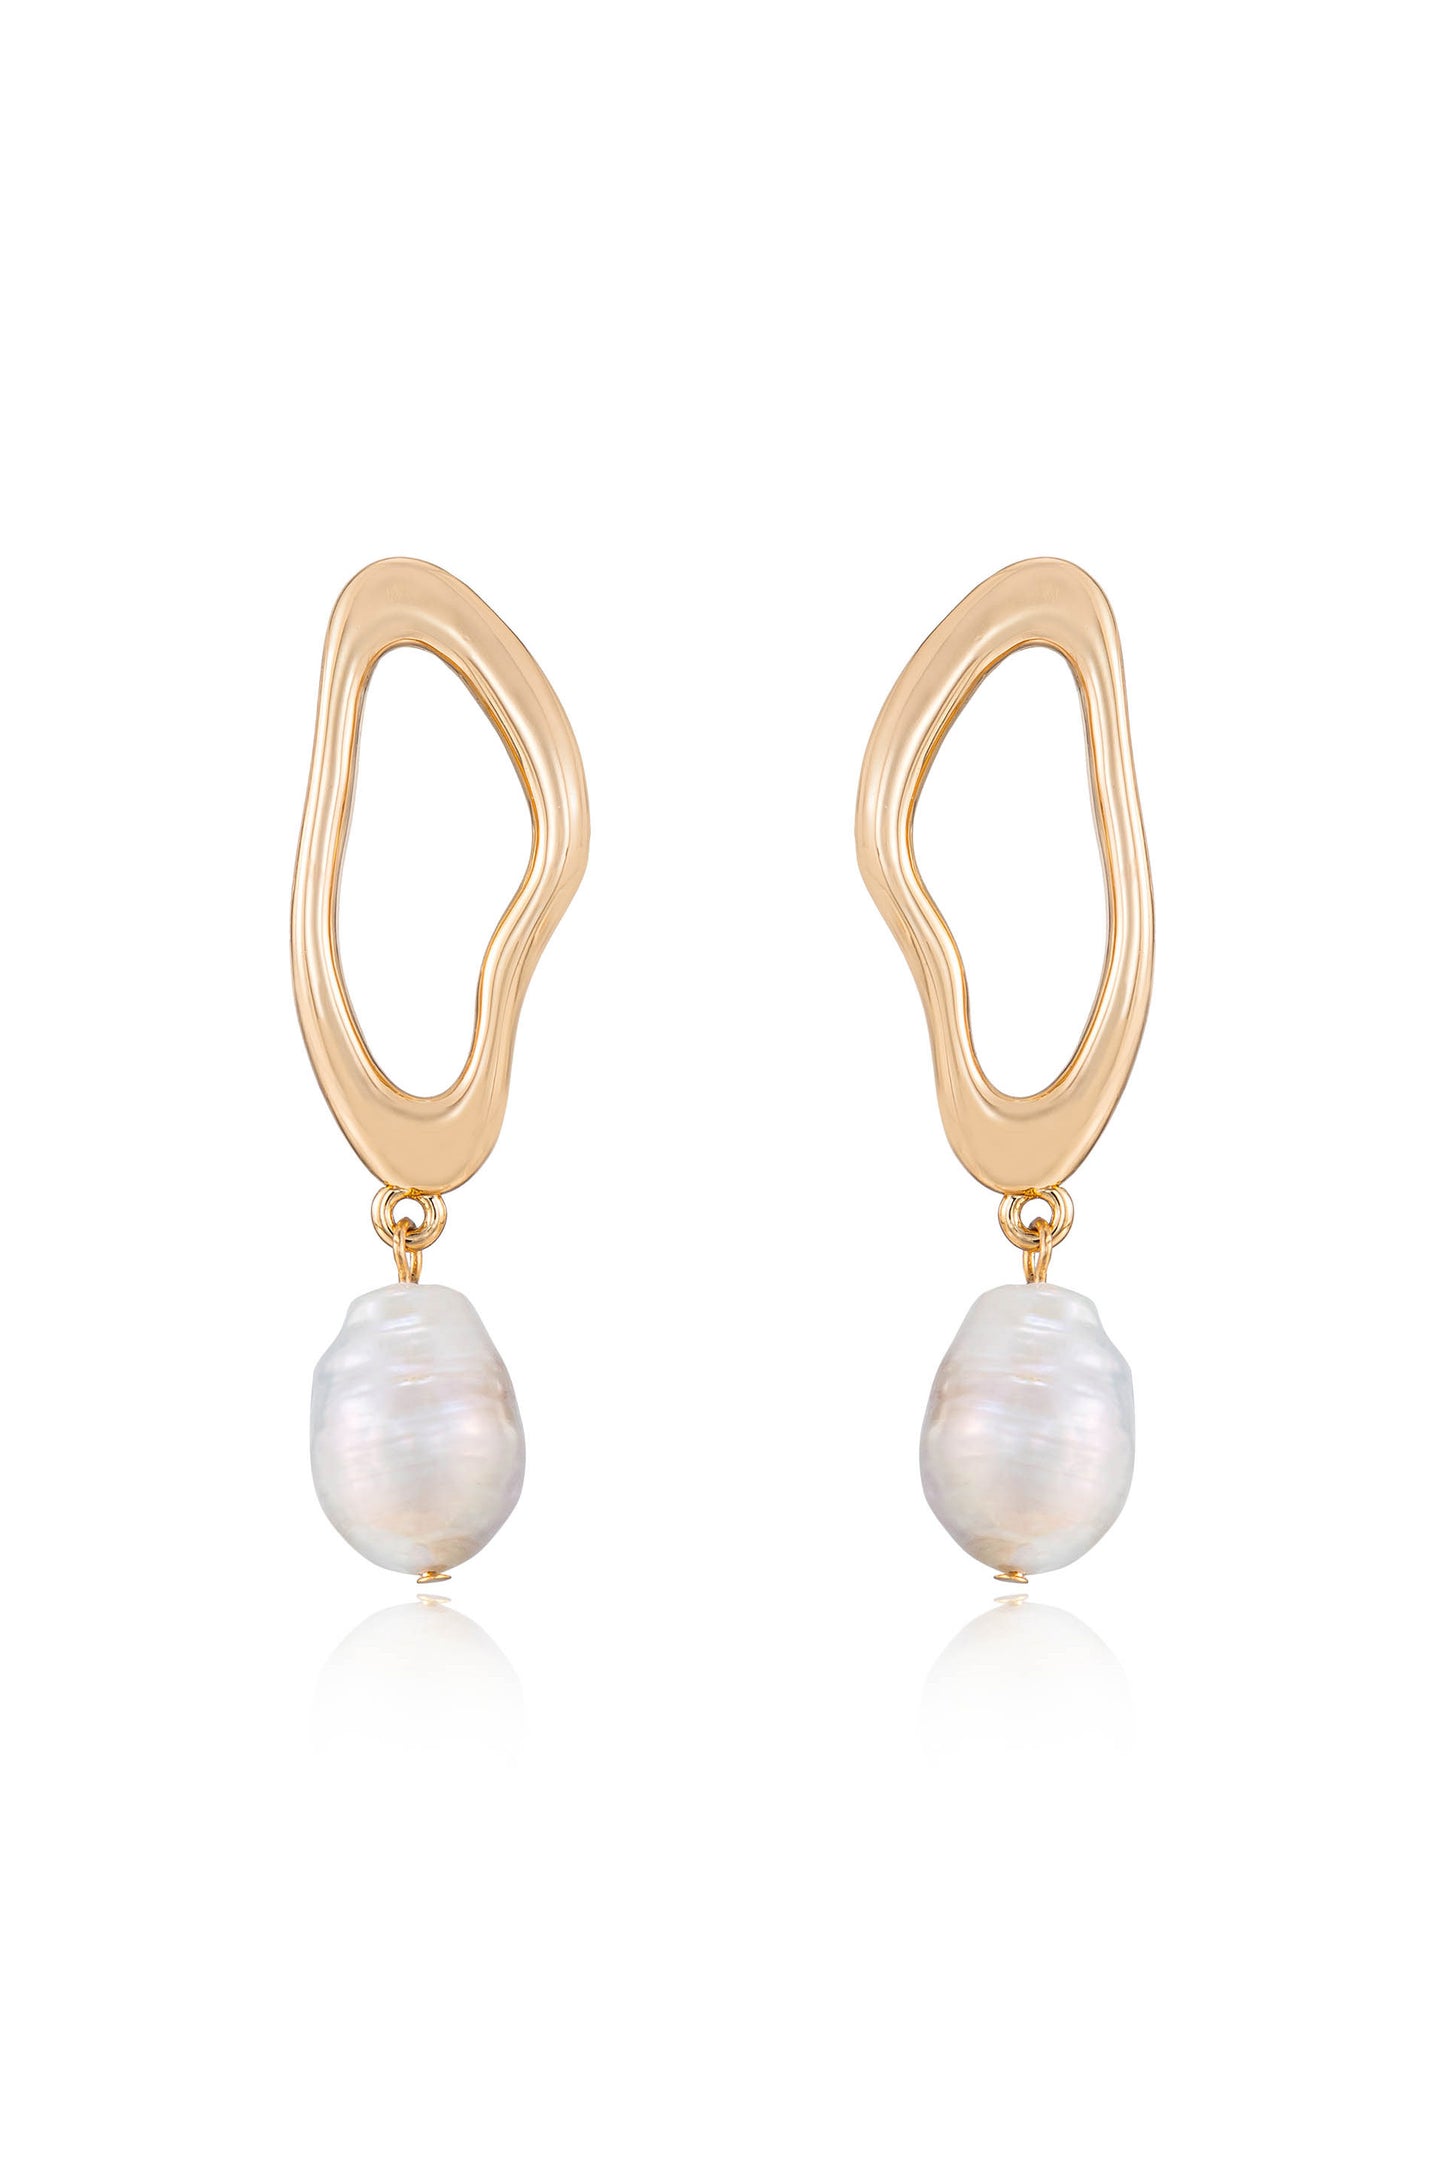 Open Circle 18k Gold Plated and Freshwater Pearl Dangle Earrings in white